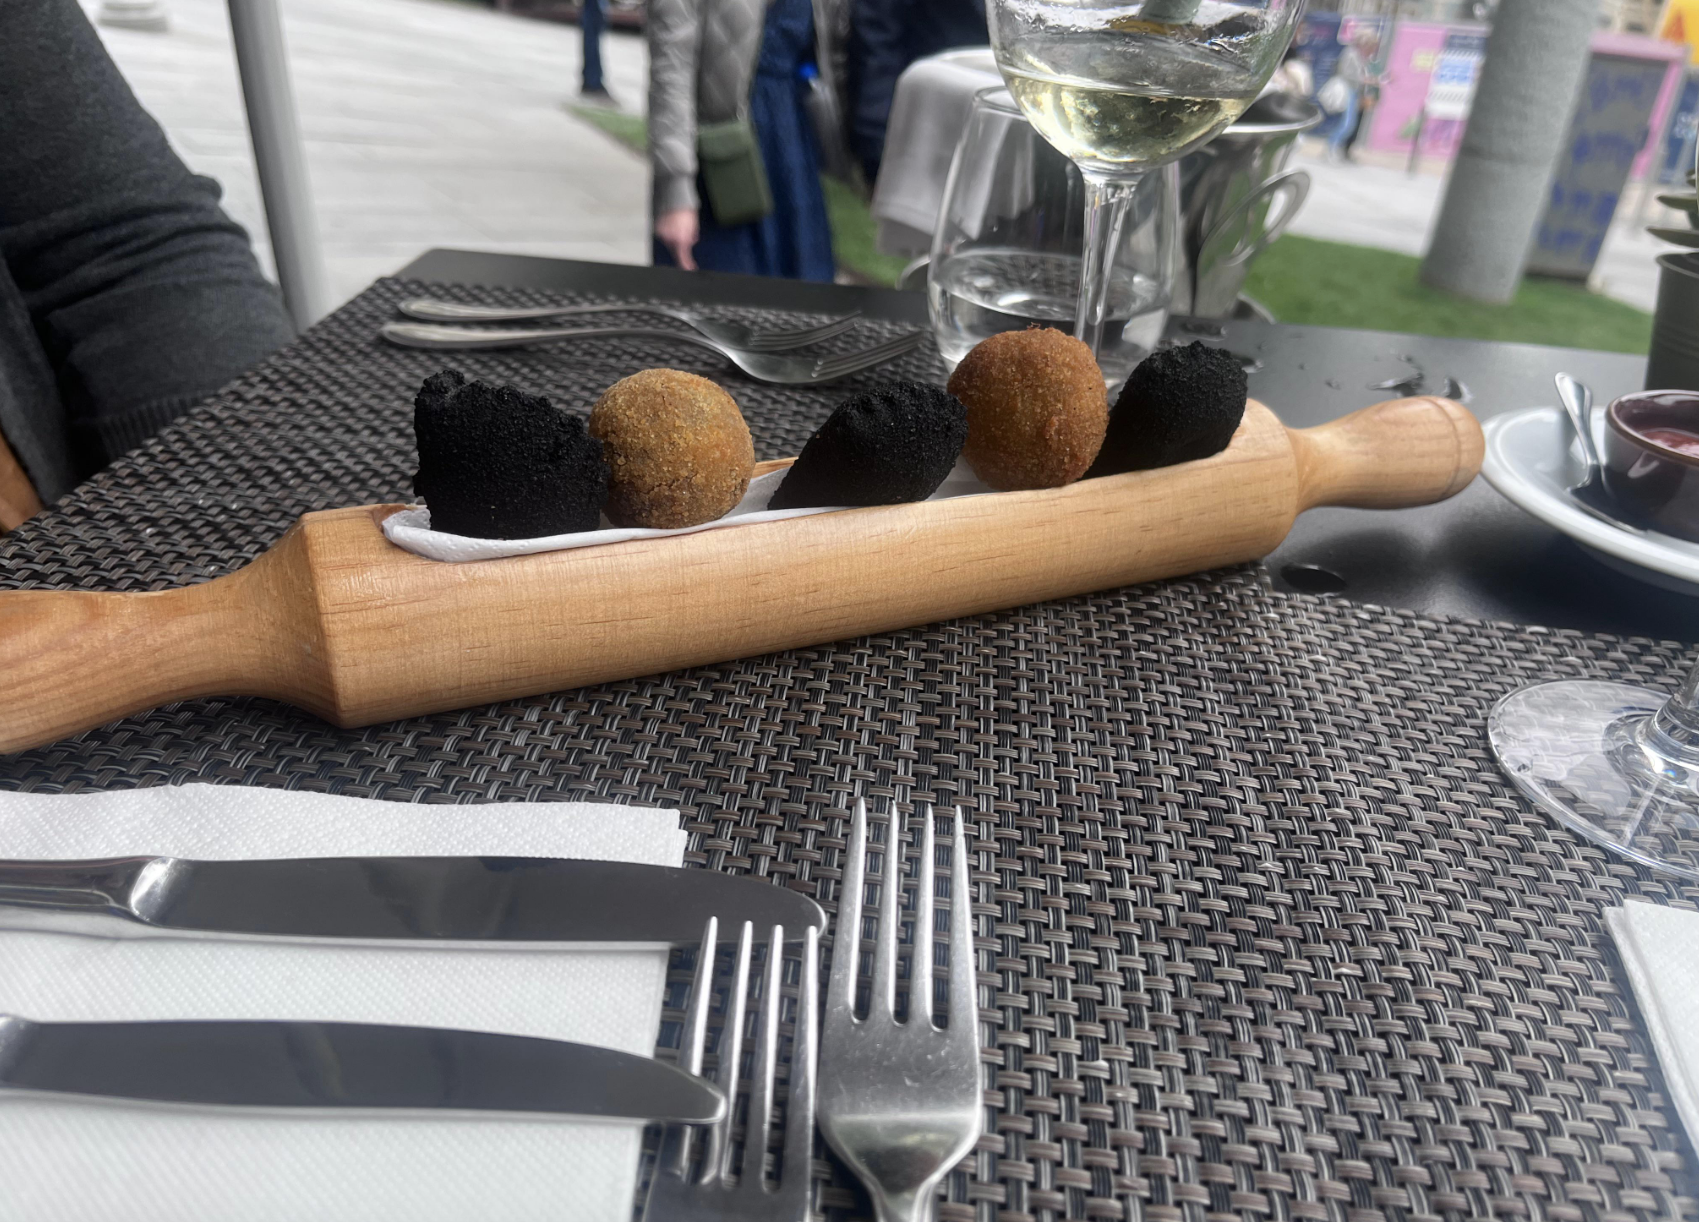 Food resting on a repurposed rolling pin